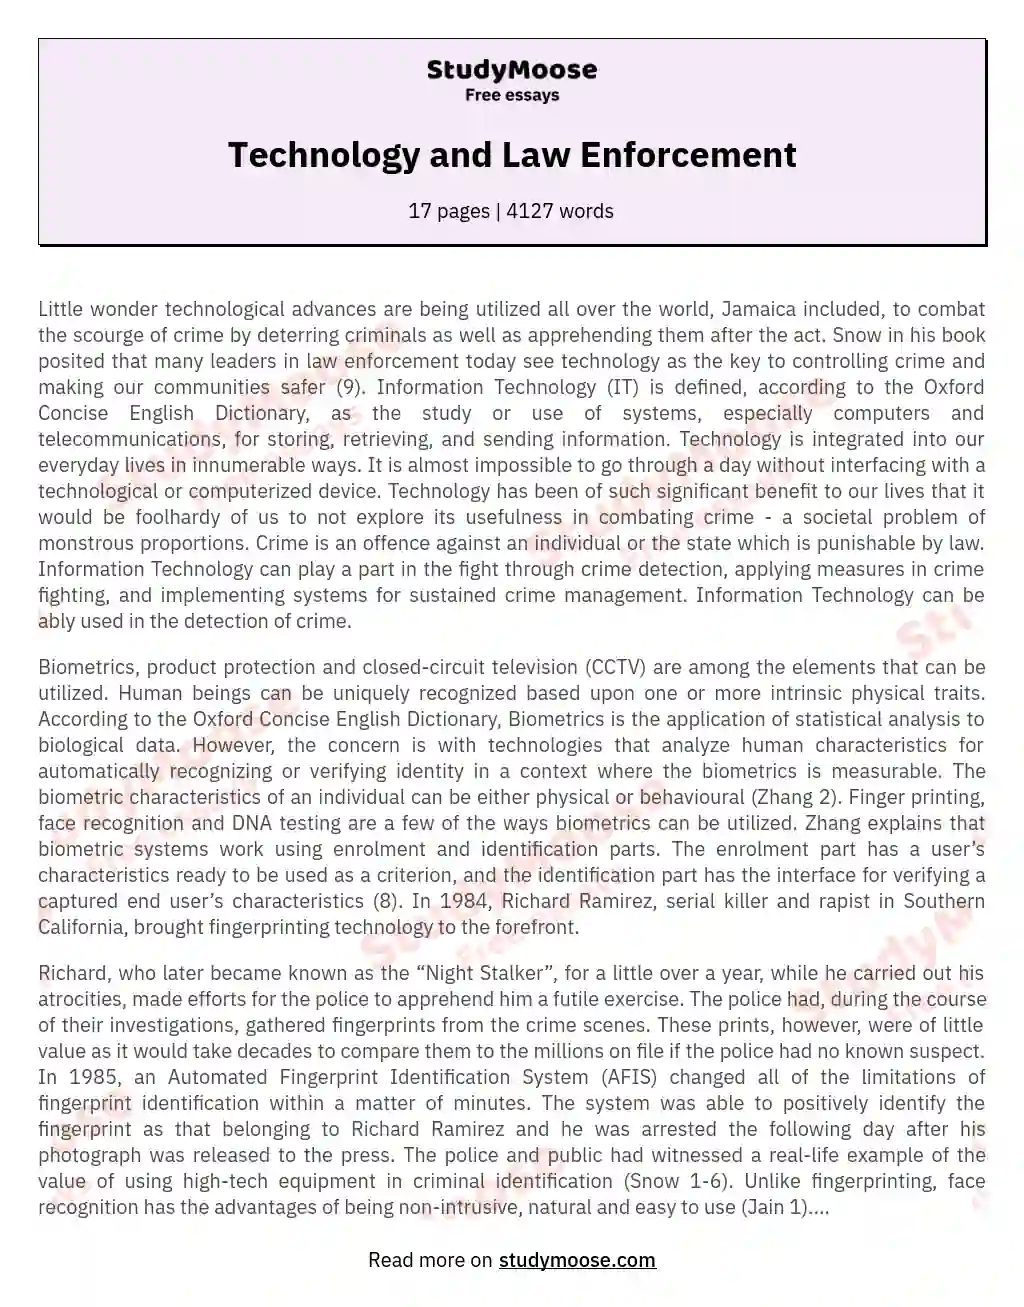 Technology and Law Enforcement